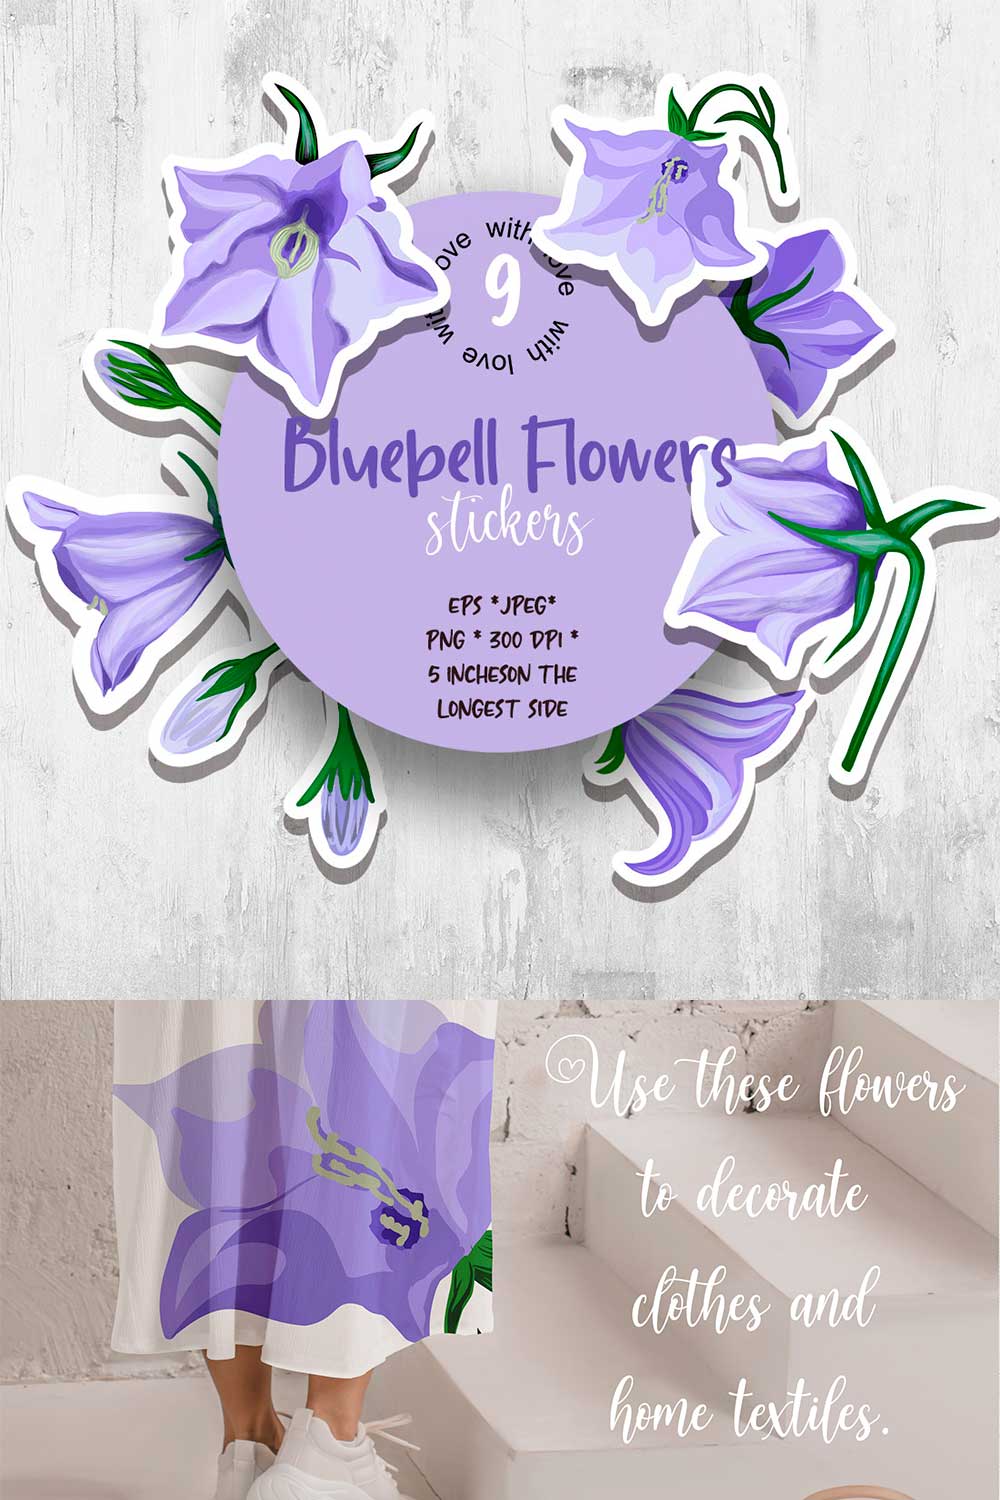 Clipart Blue bells | flower stickers png pinterest preview image.